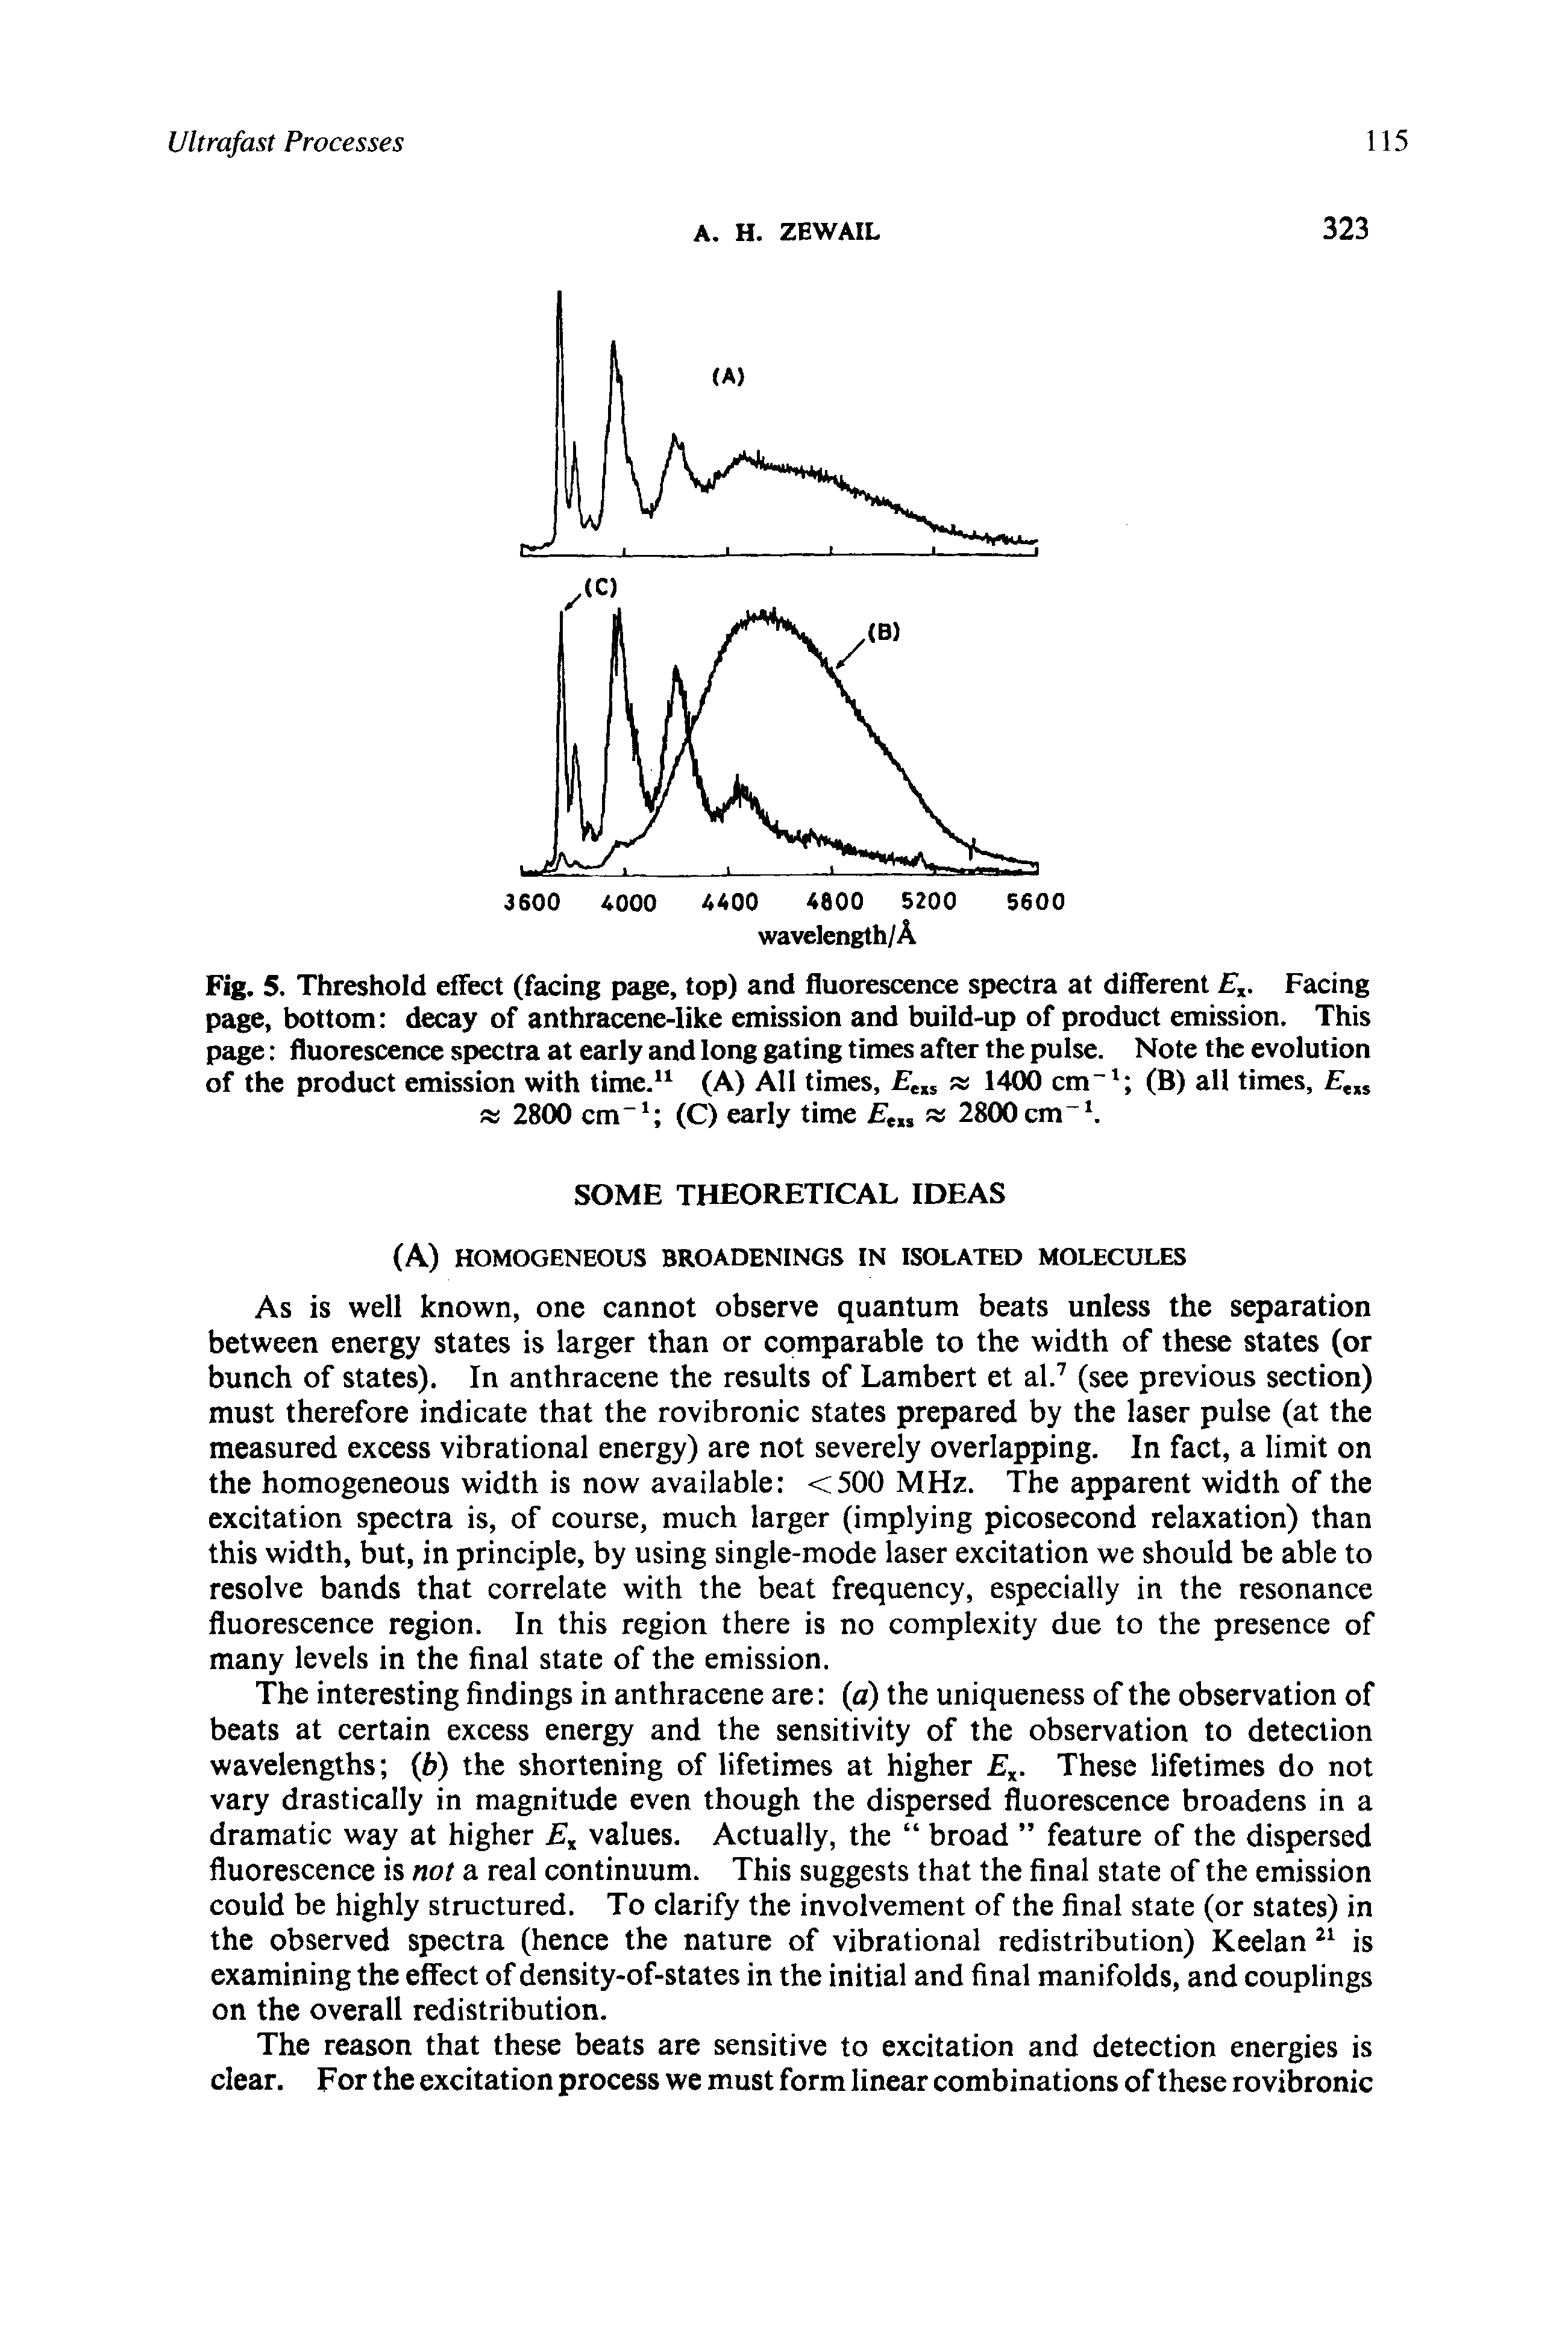 Fig. 5. Threshold effect (facing page, top) and fluorescence spectra at different ,. Facing page, bottom decay of anthracene-like emission and build-up of product emission. This page fluorescence spectra at early and long gating times after the pulse. Note the evolution of the product emission with time. (A) All times, 1400 cm (B) all times,...